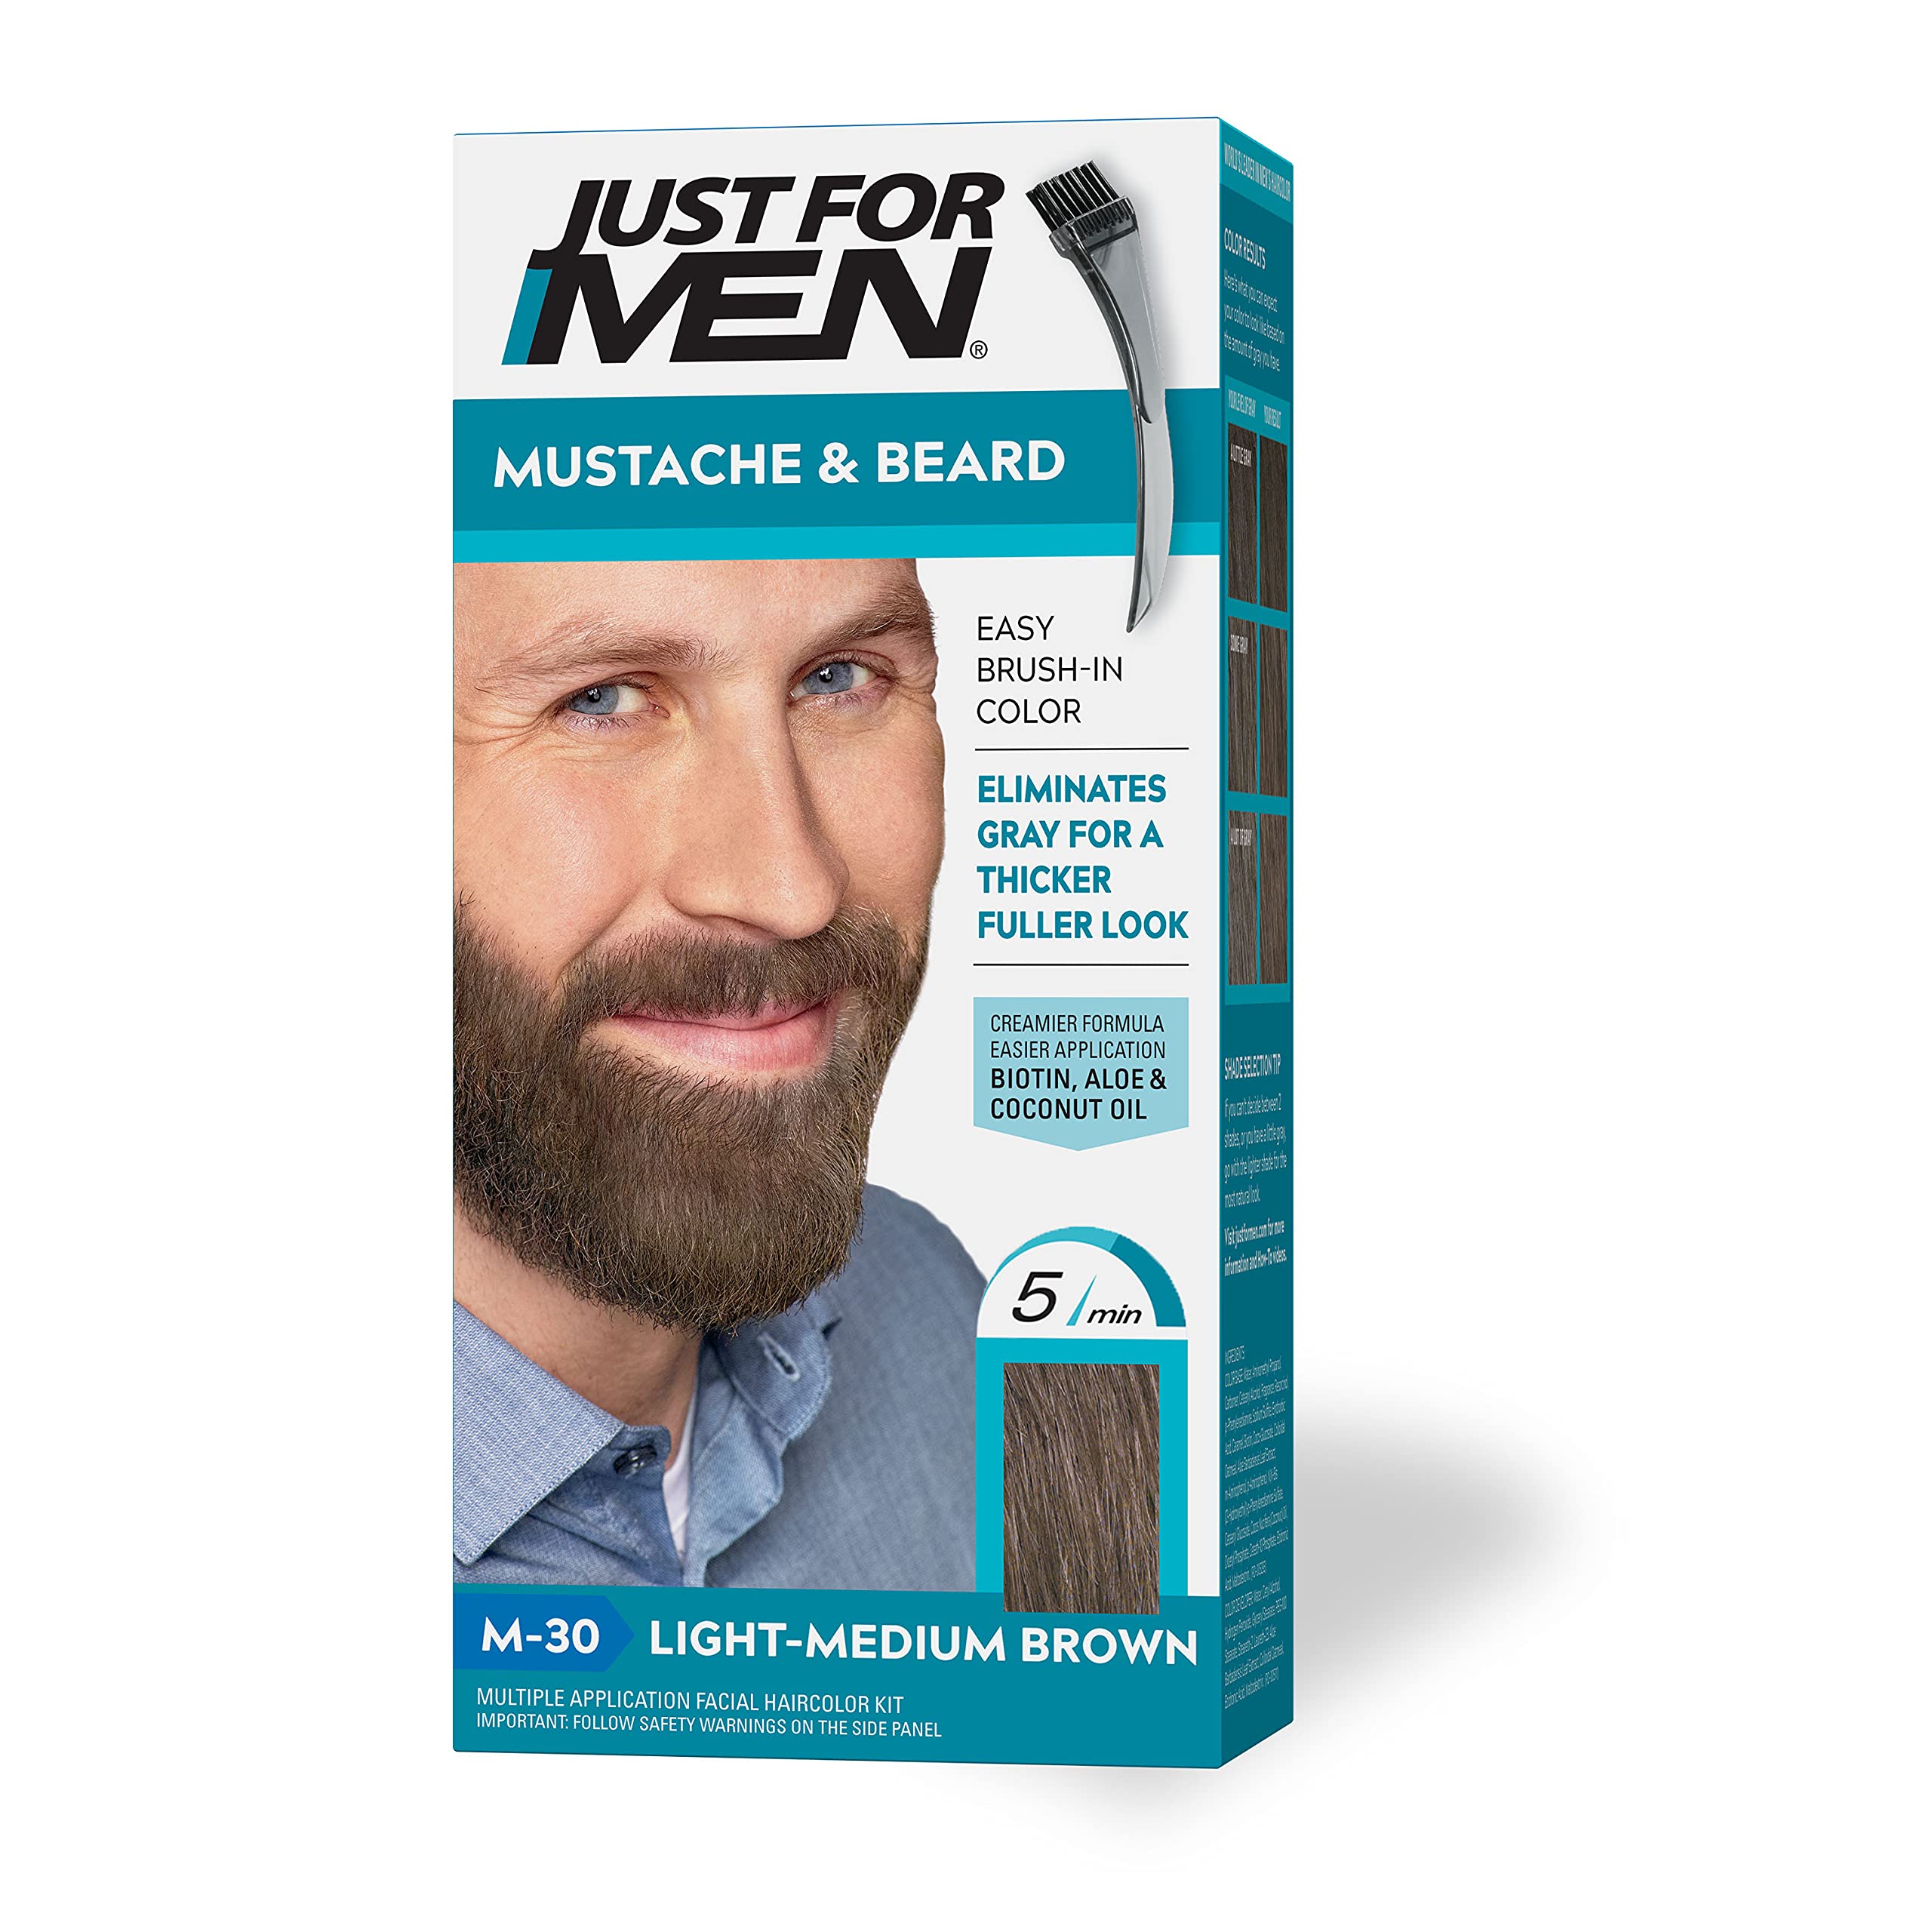 Just For Men Mustache & Beard, Beard Dye for Men with Brush Included for Easy Application, With Biotin Aloe and Coconut Oil for Healthy Facial Hair - Light-Medium Brown, M-30, Pack of 1